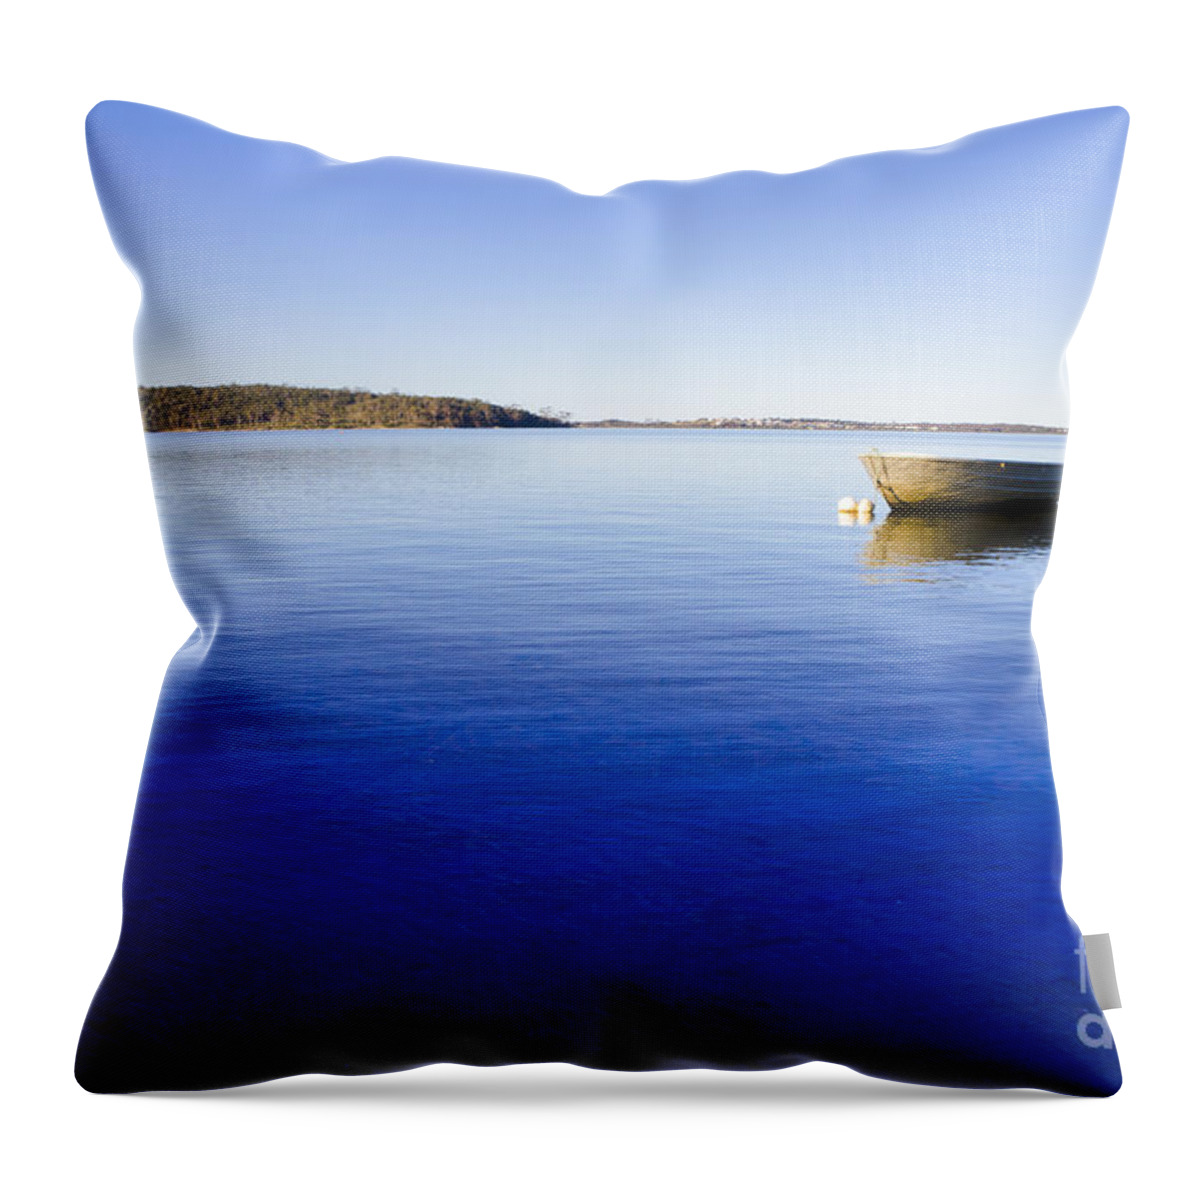 Small Throw Pillow featuring the photograph Boating backgrounds by Jorgo Photography